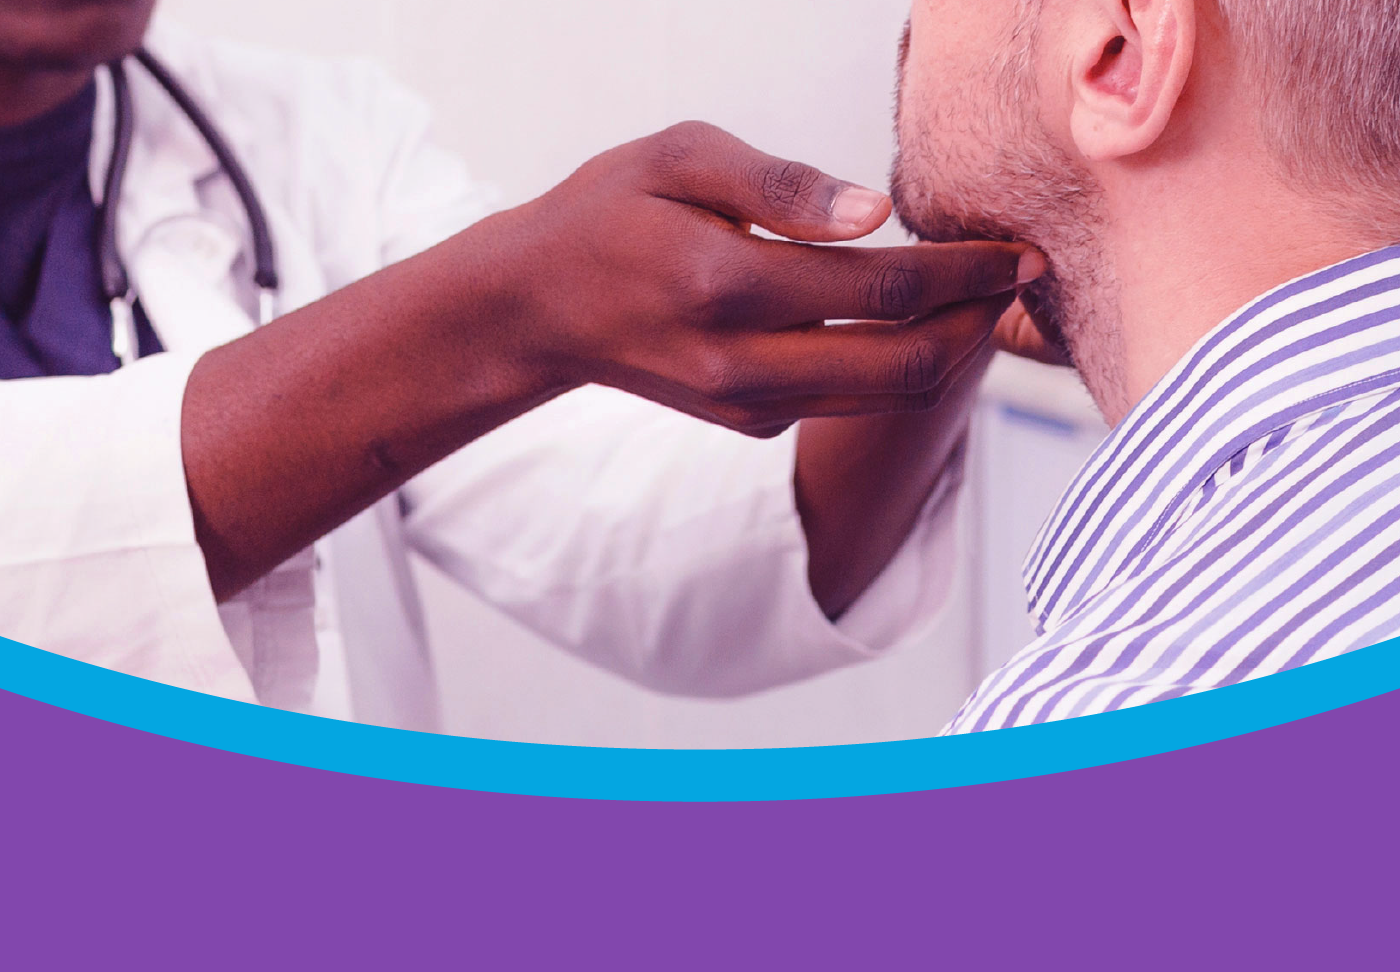 A head and neck cancer specialist examines a patient's neck.